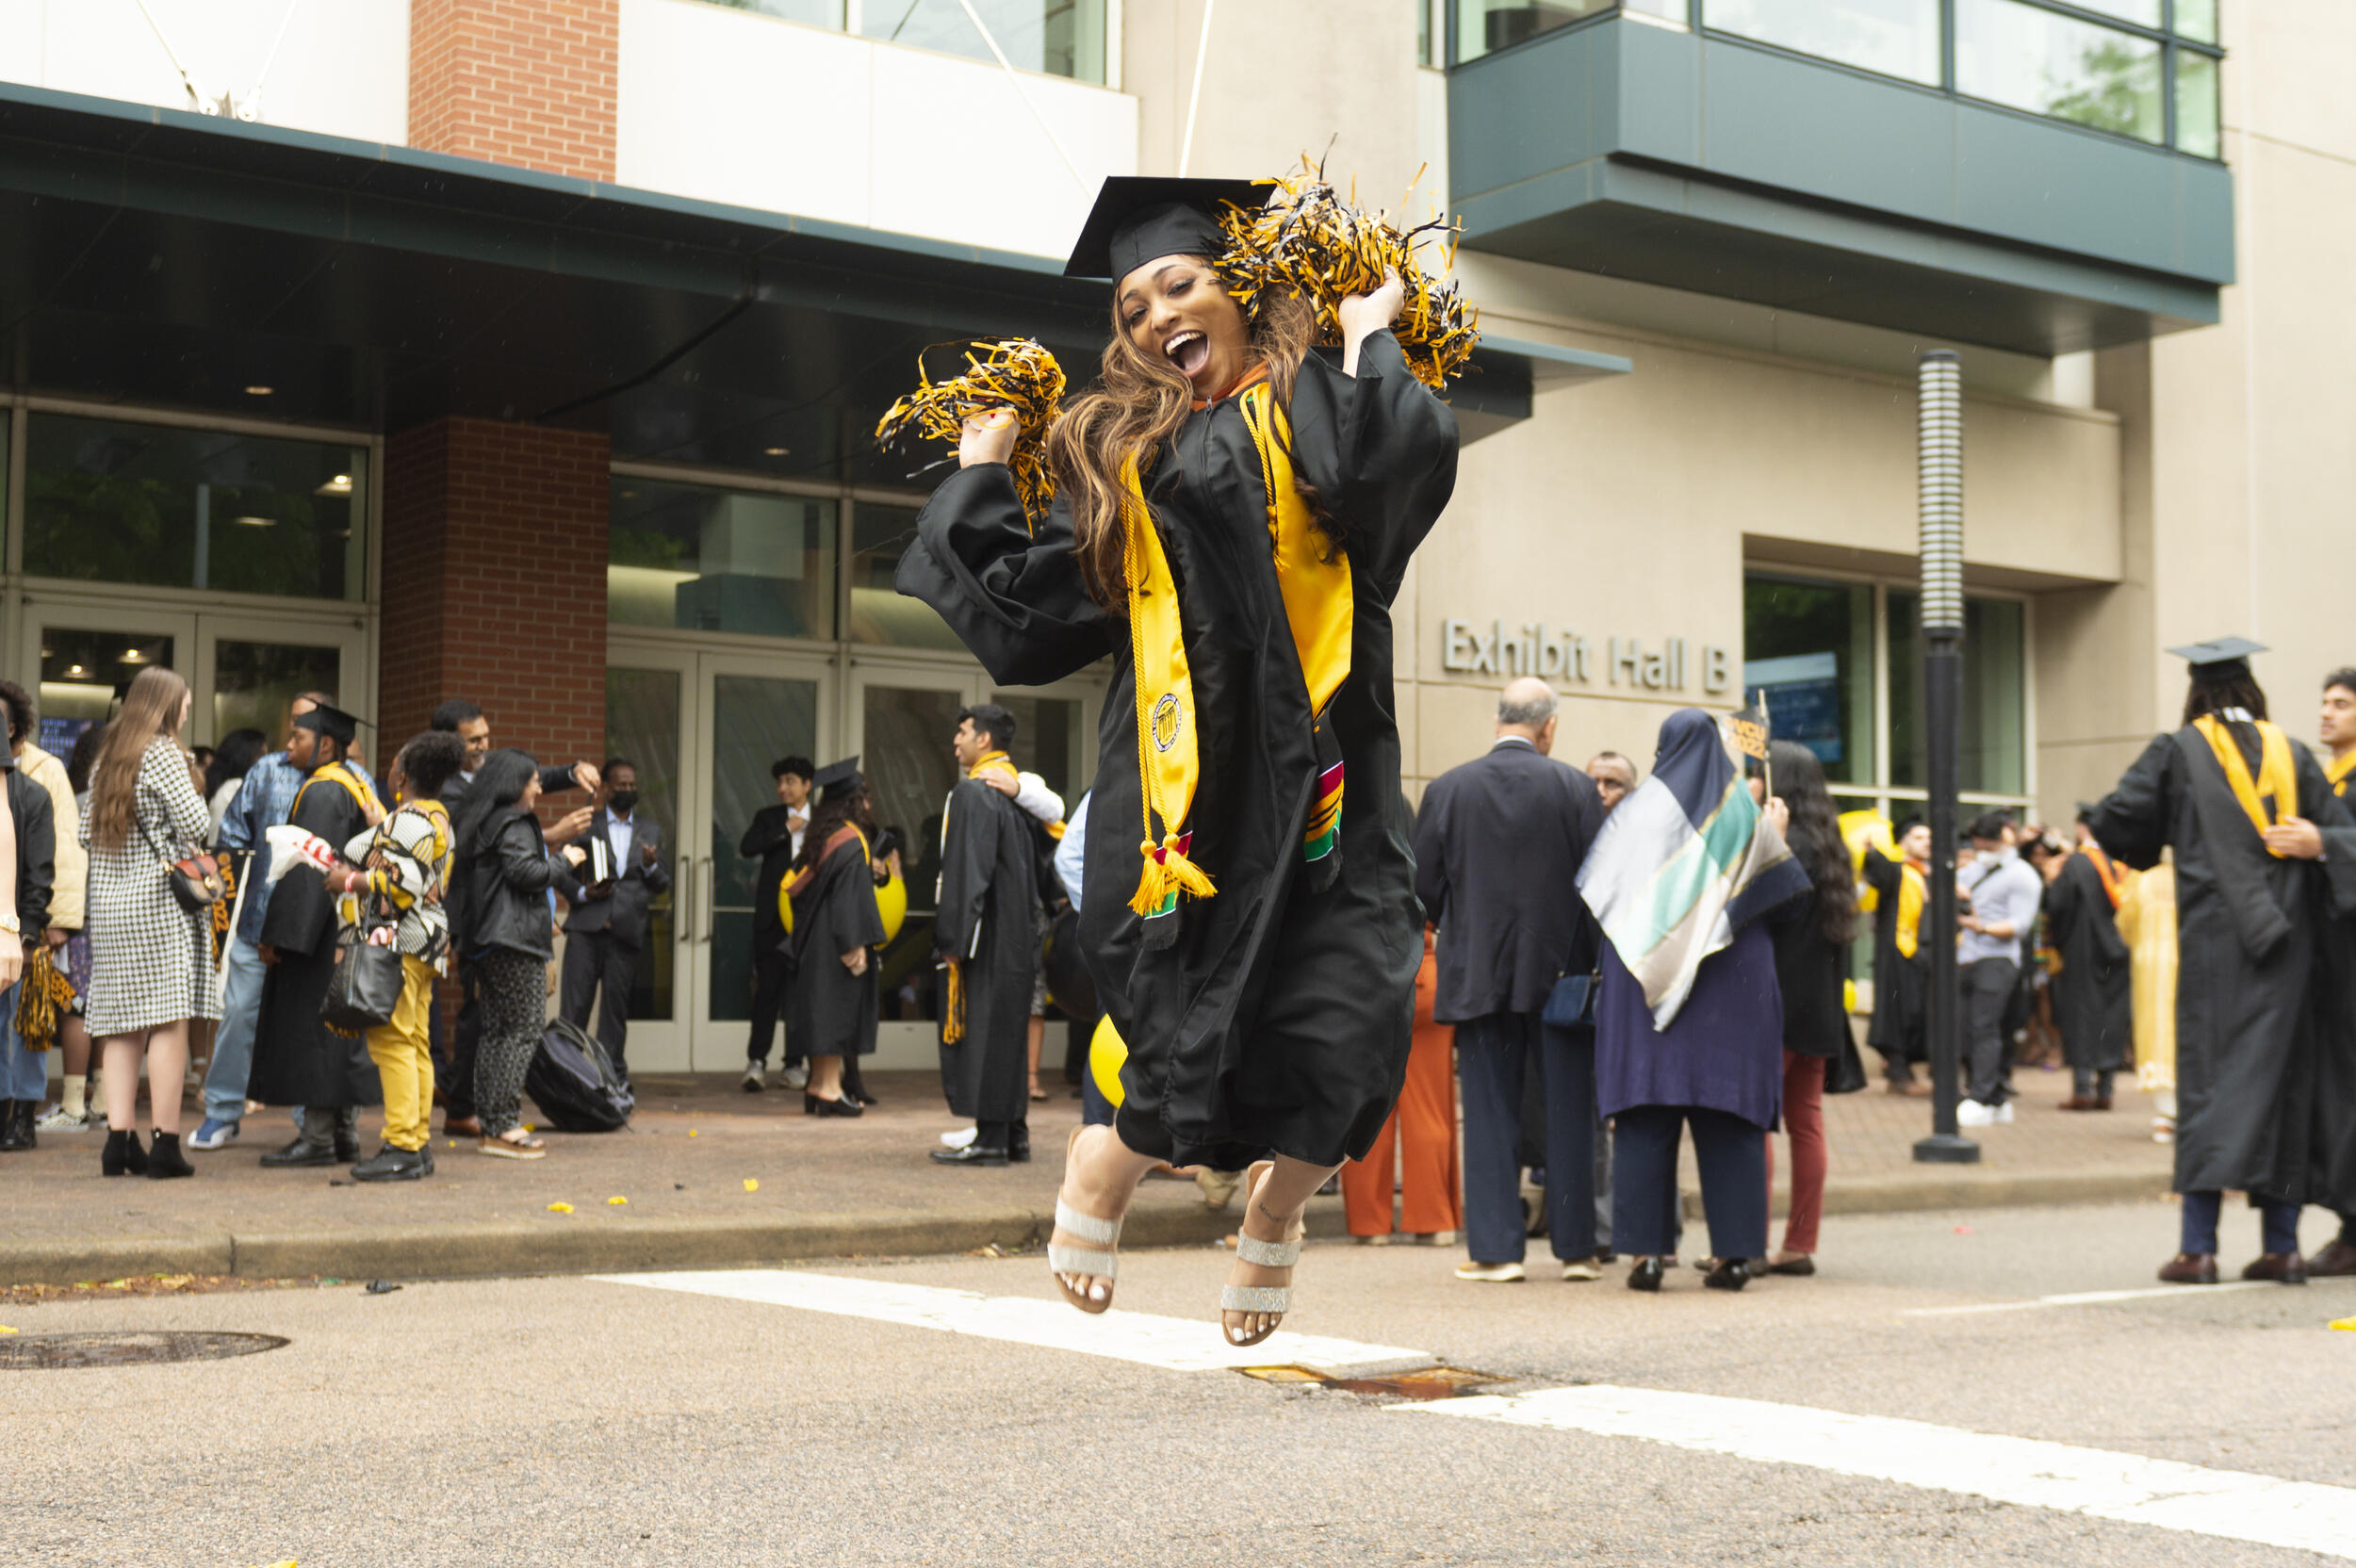 A woman wearing a graduation cap and gown jumping in the air with pom poms 